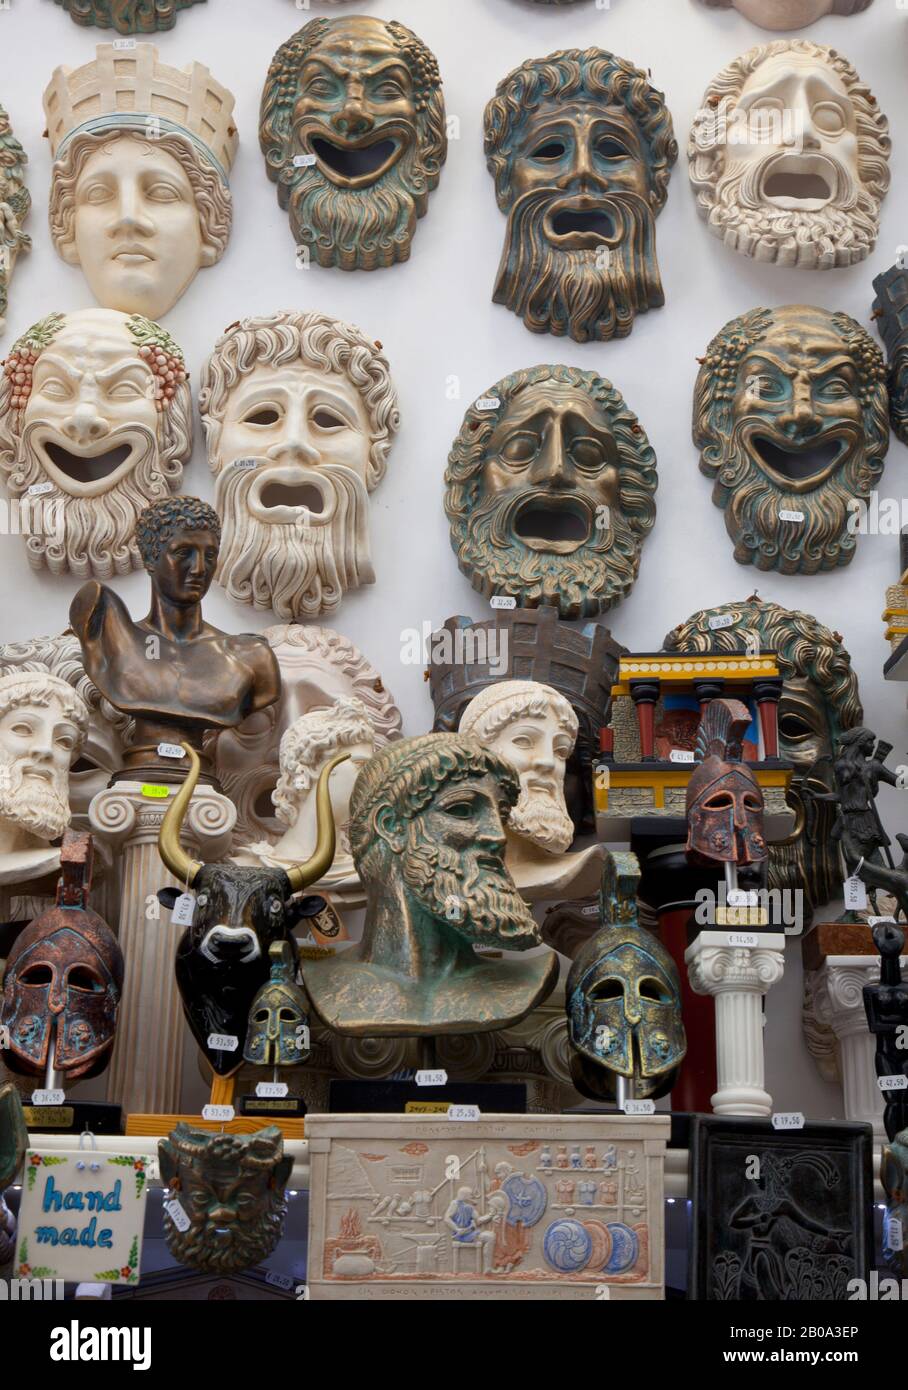 Souvenirs, including greek masks and statuettes,  for sale in a tourist shosp Agios Nikolaos in Crete, Grece. August 2018 Stock Photo